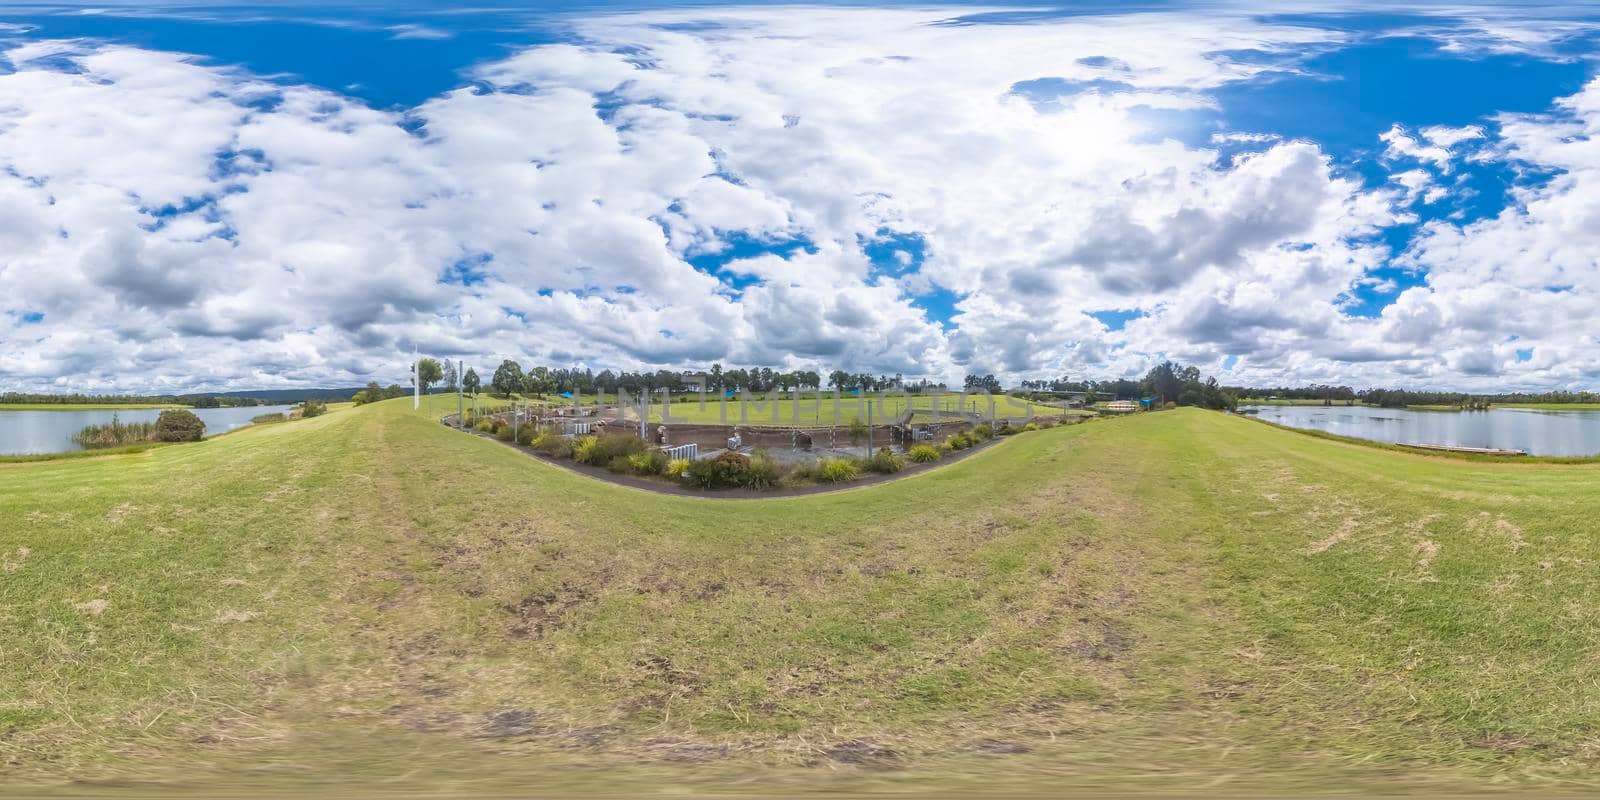 Spherical 360 panorama photograph of the Whitewater Stadium in Penrith by WittkePhotos